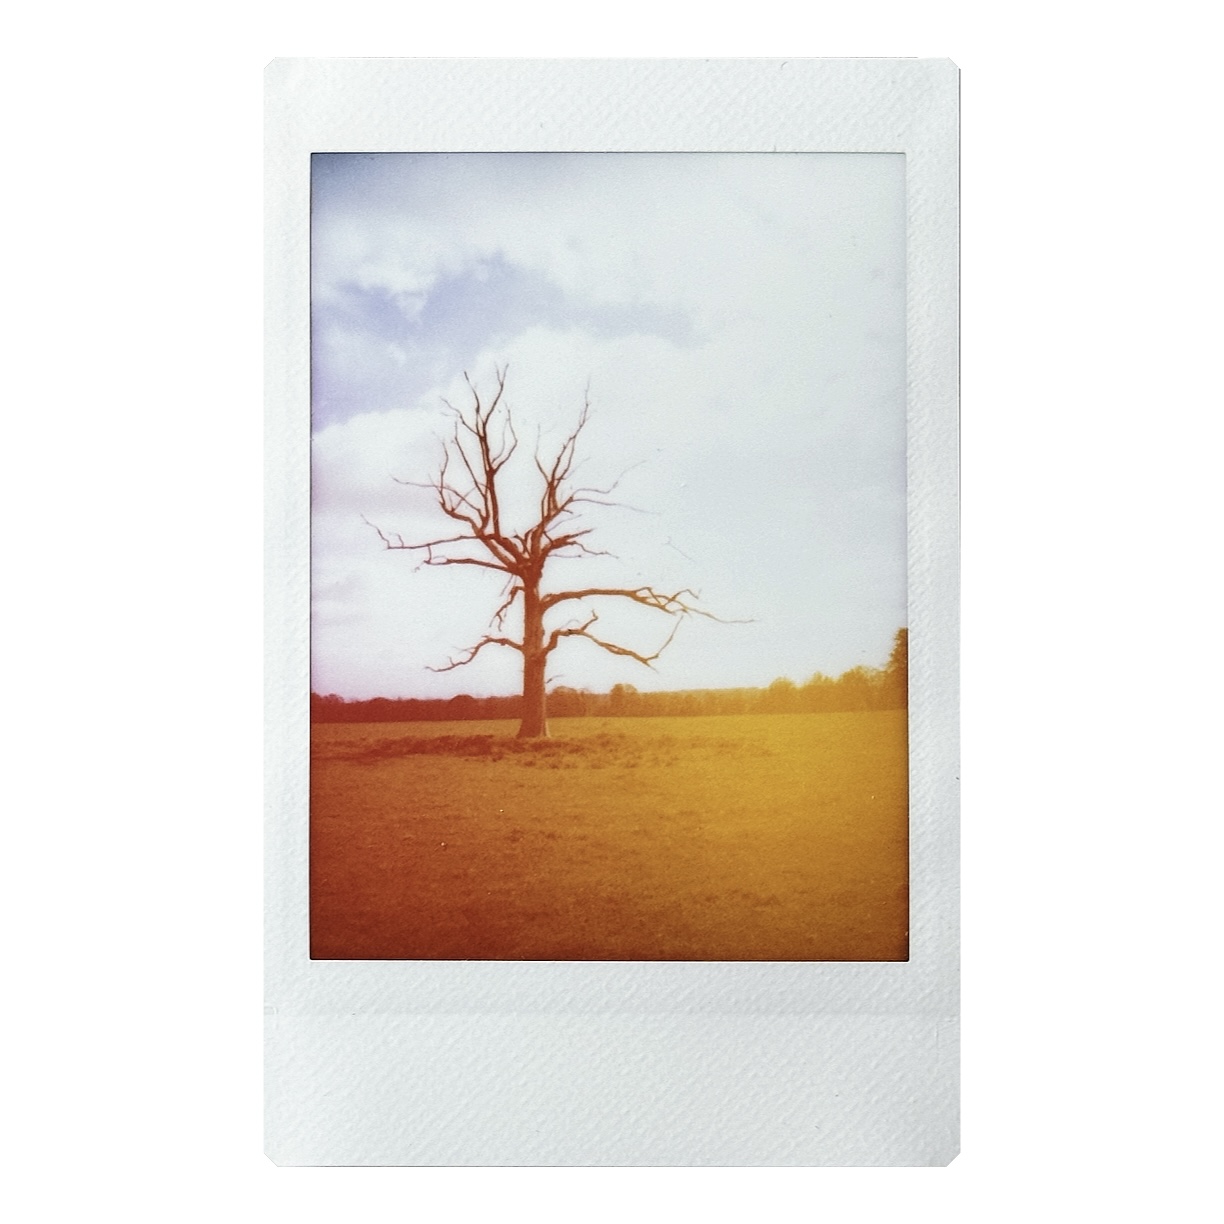 Fujifilm Instax Mini 99 instant print of a tree silhouette on crest of a hill with creative color effect